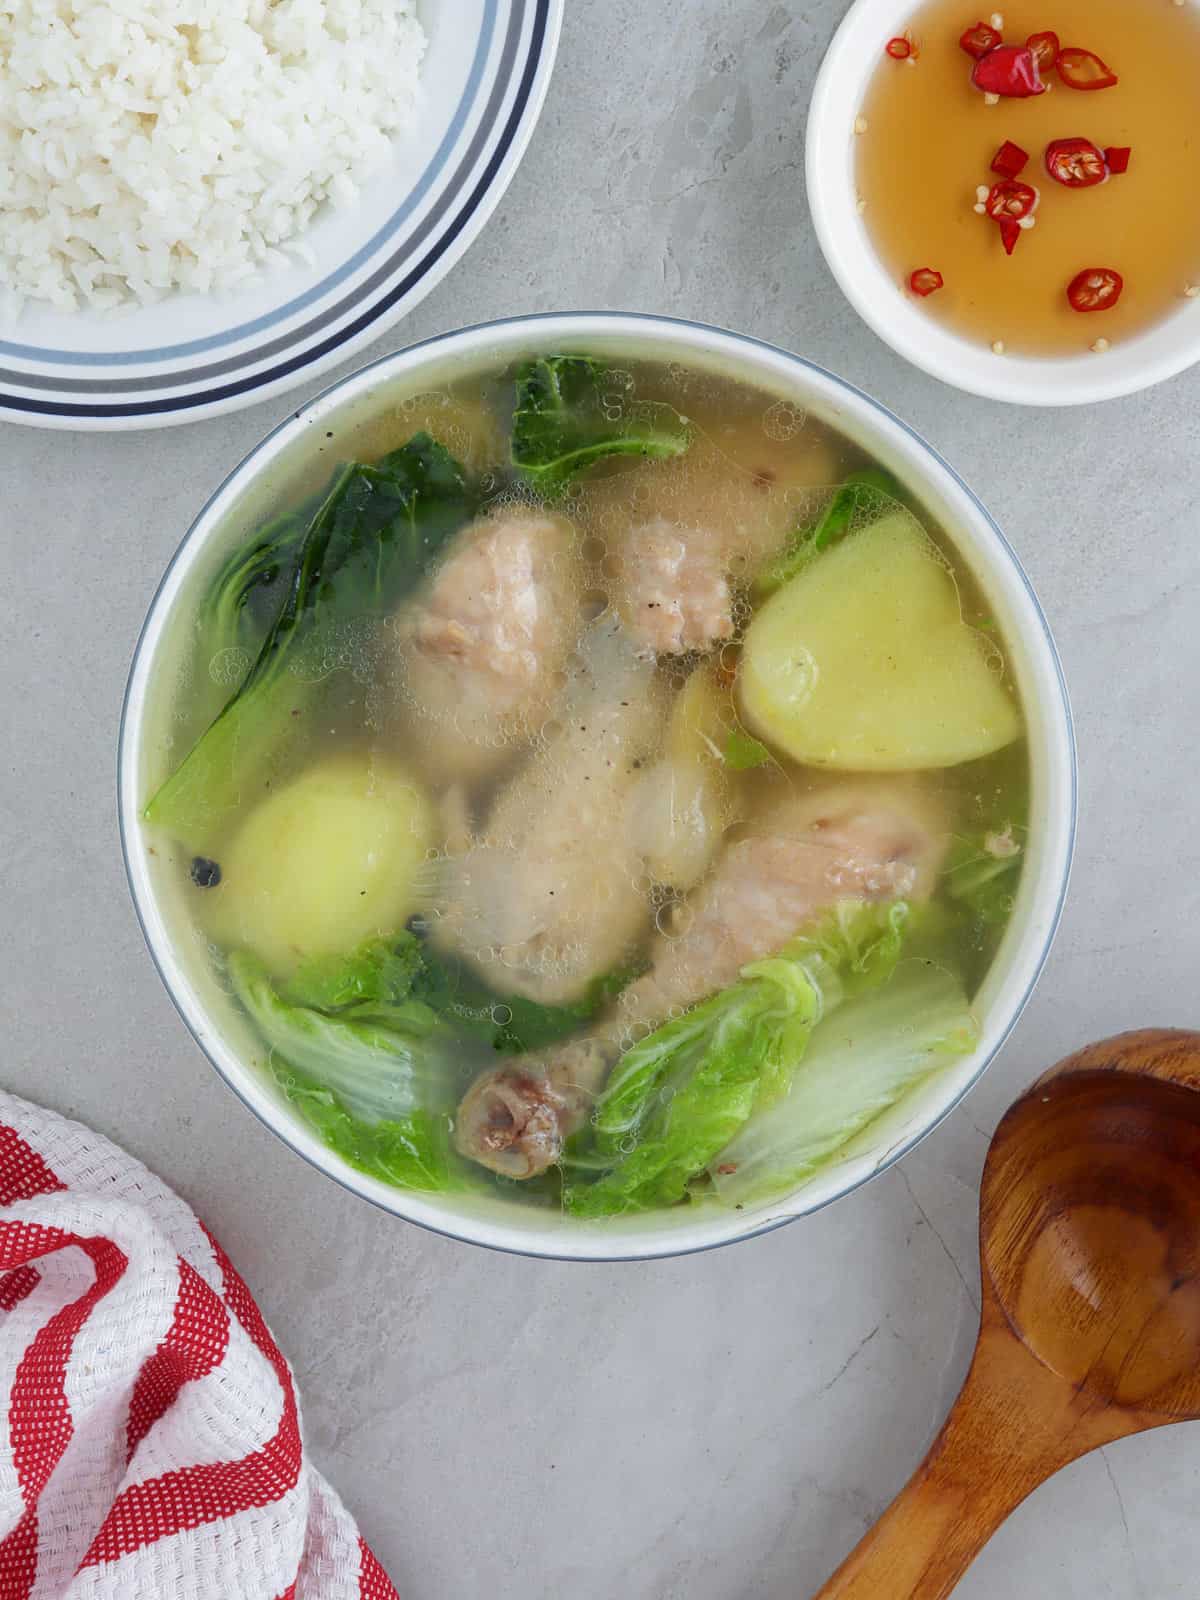 boiled chicken soup with potatoes and pechay in a white bowl with fish sauce in the background.